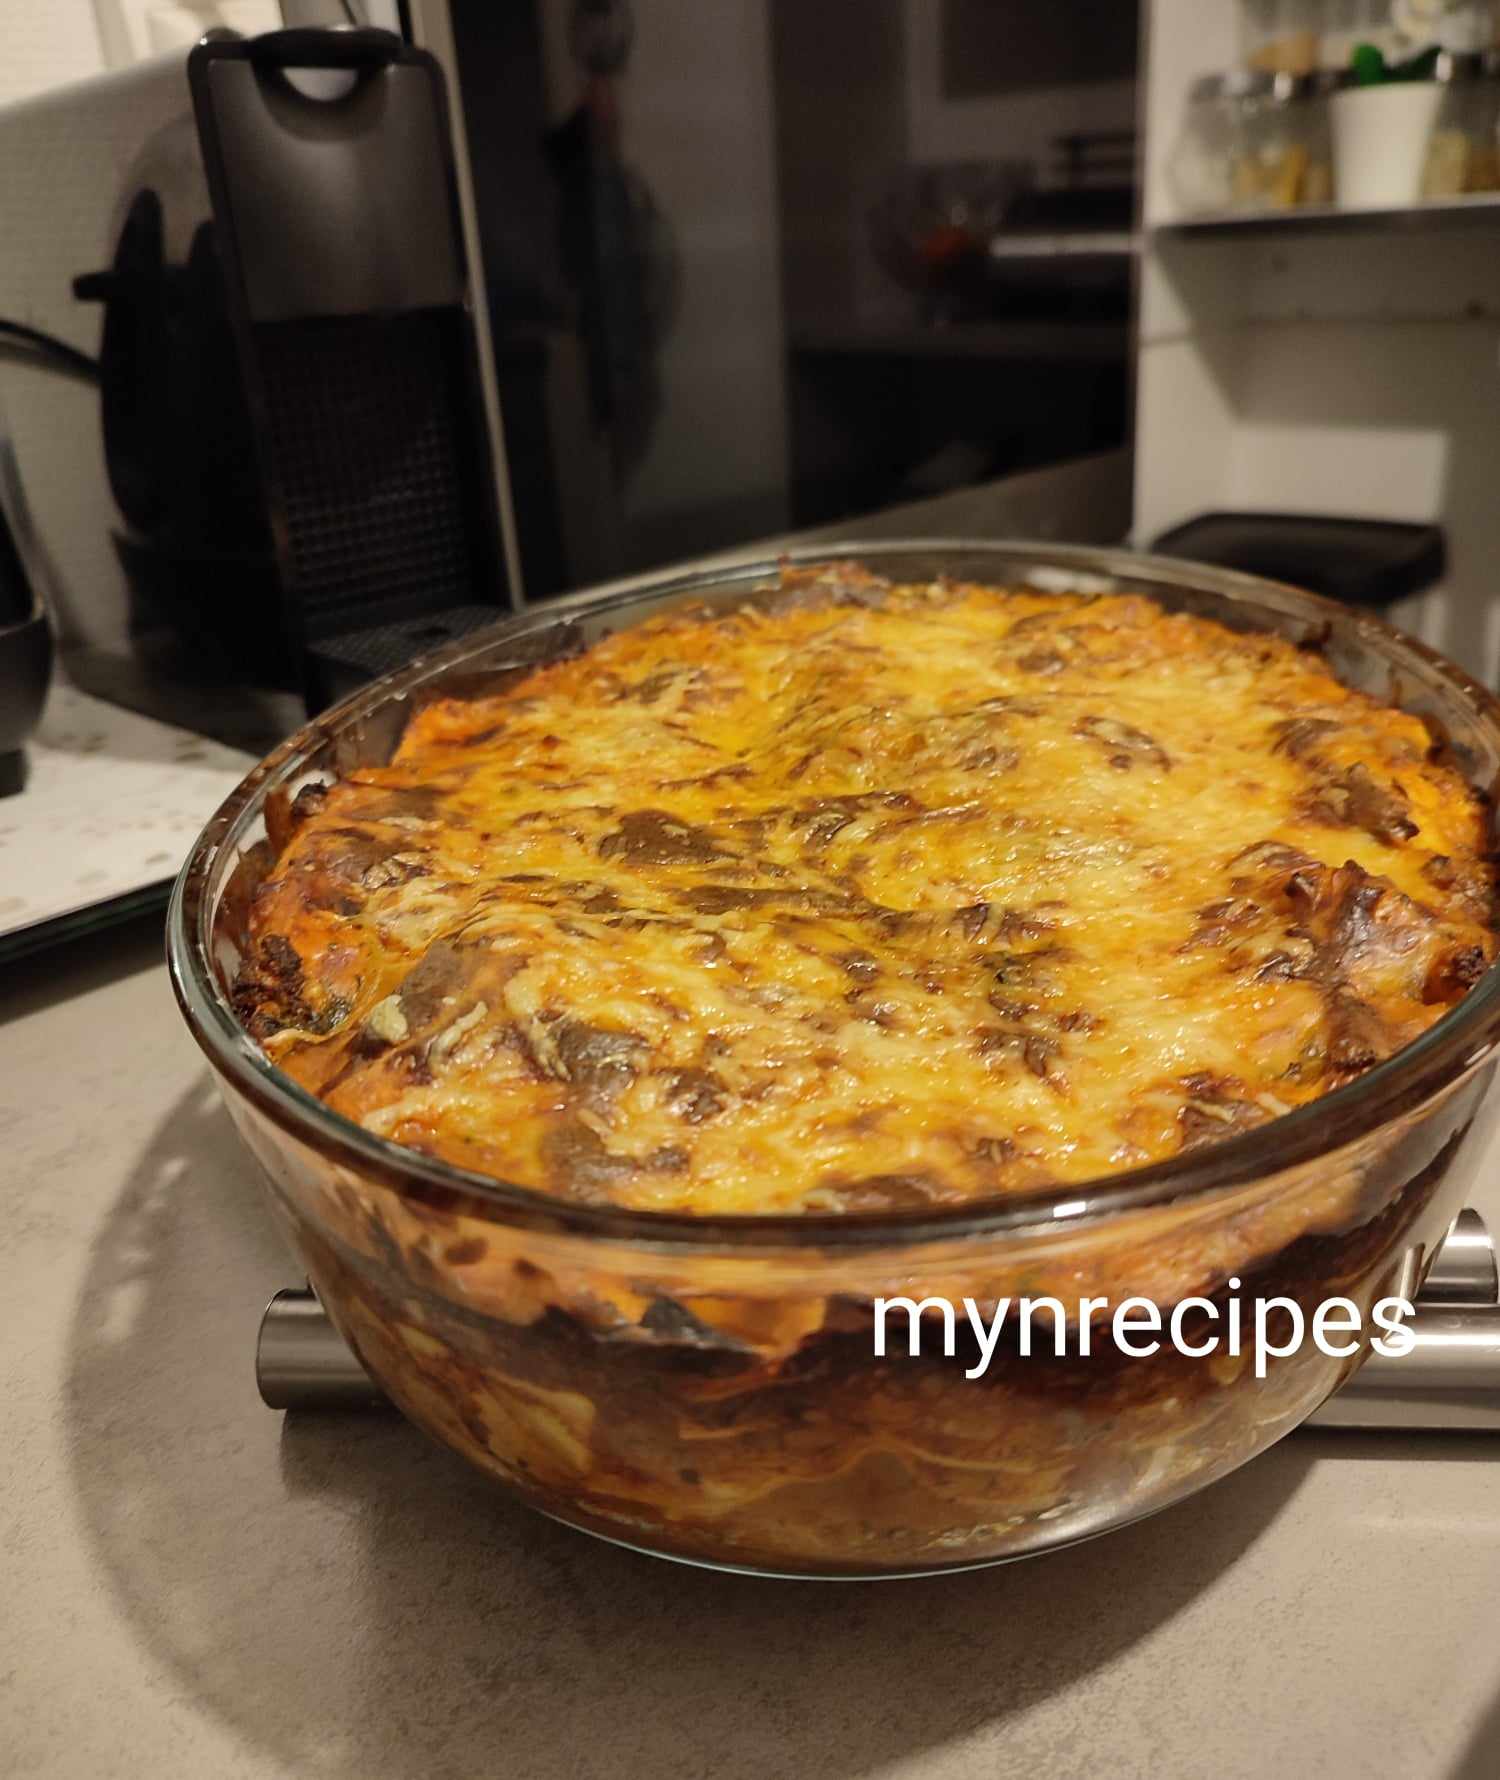 Beef lasagne Recipe is a classic Italian dish that is loved by many people all over the world. It consists of layers of pasta sheets, meat sauce, and cheese that are baked together to create a hearty and satisfying meal. While there are many variations of lasagne, the beef version is one of the most popular.